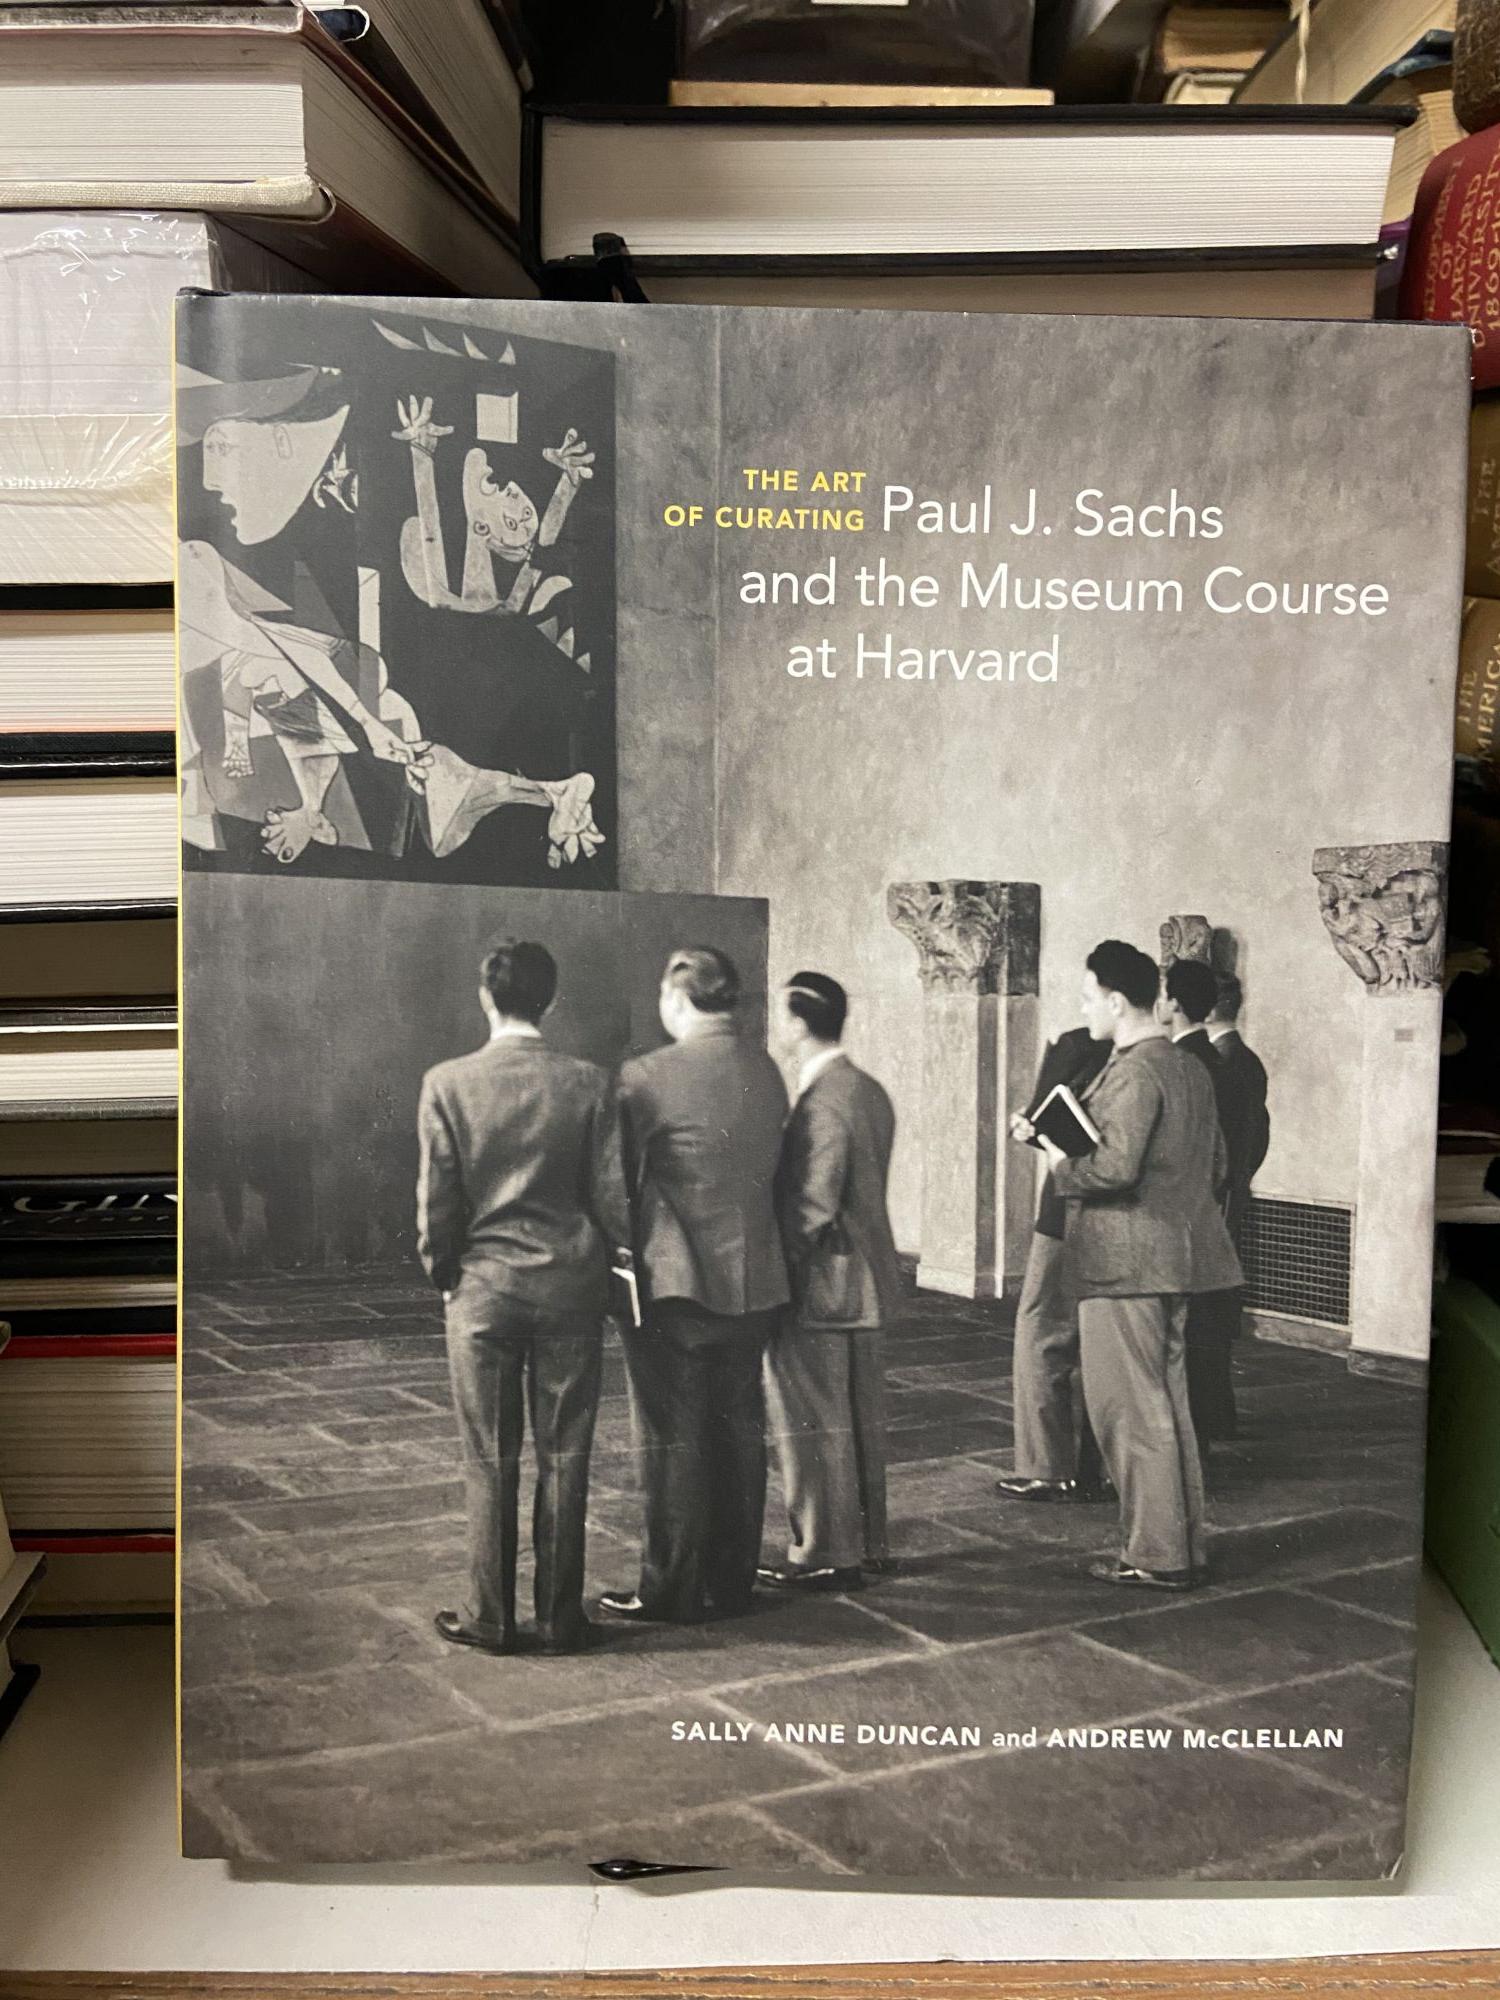 The Art of Curating: Paul J. Sachs and the Museum Course at